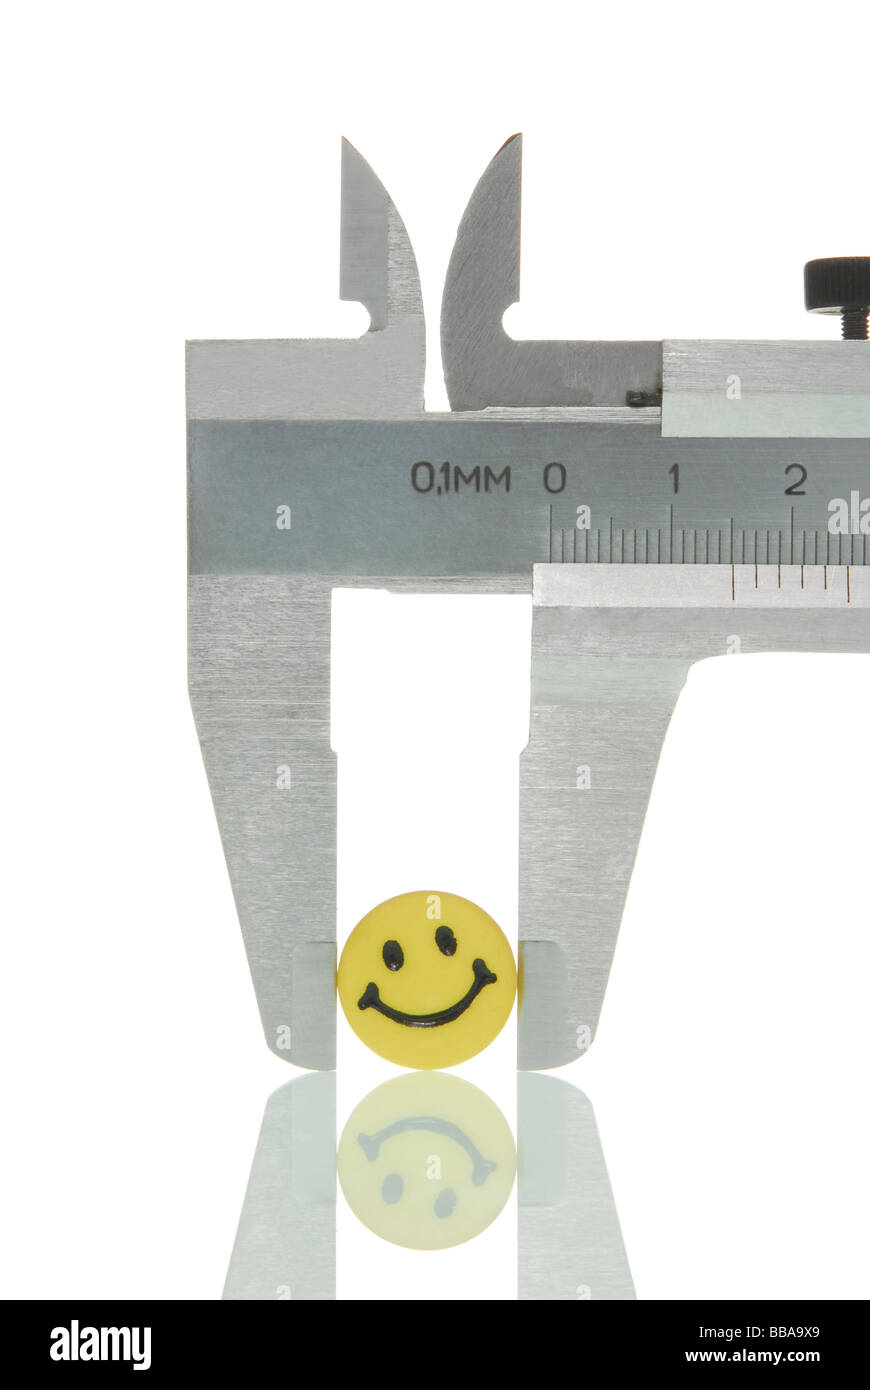 Calipers with a smiley face character, symbolic image for analysis of a human Stock Photo